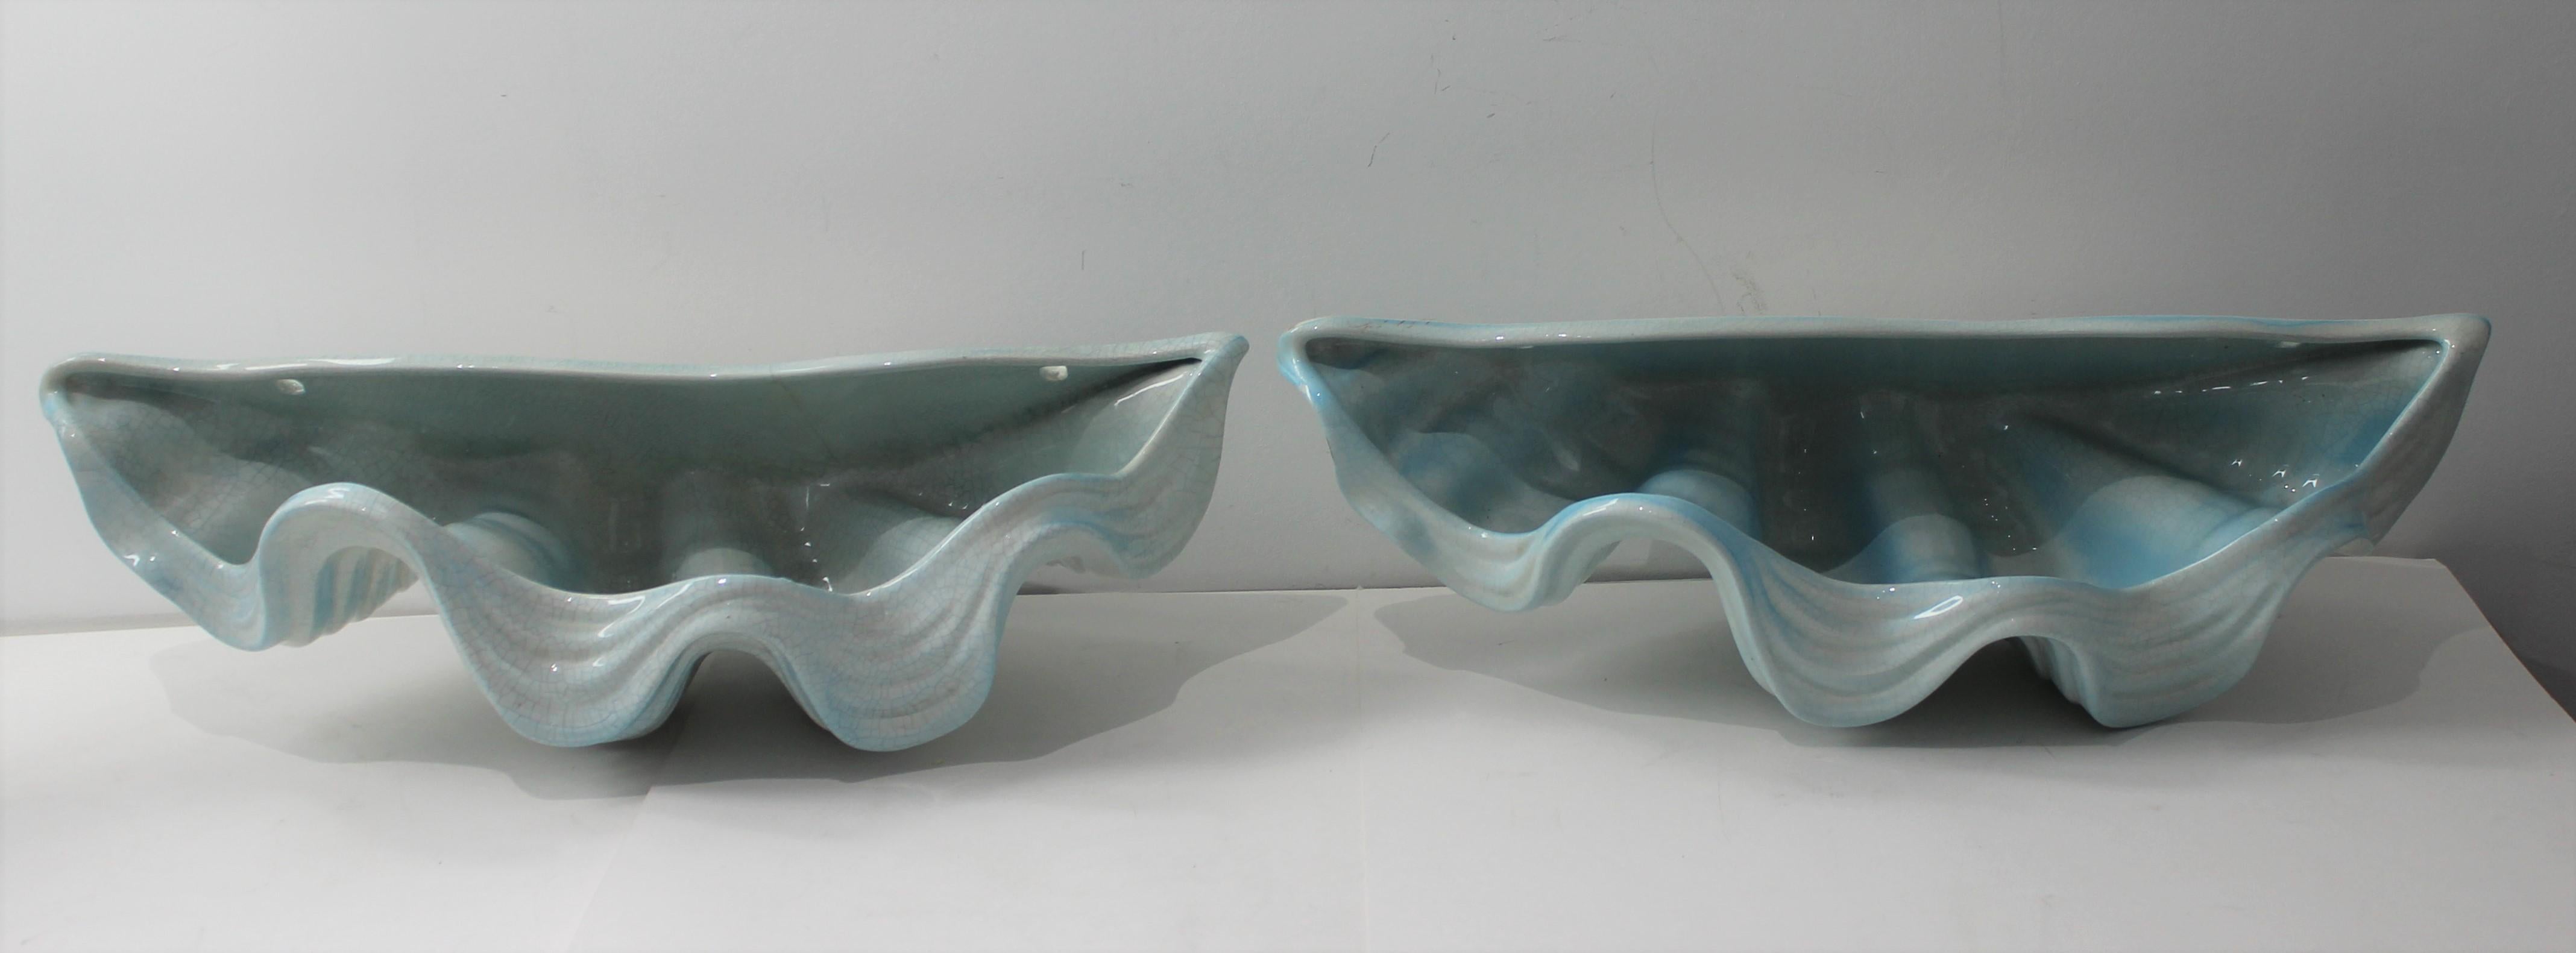 Glazed Pair of Ceramic Wall Pockets For Sale